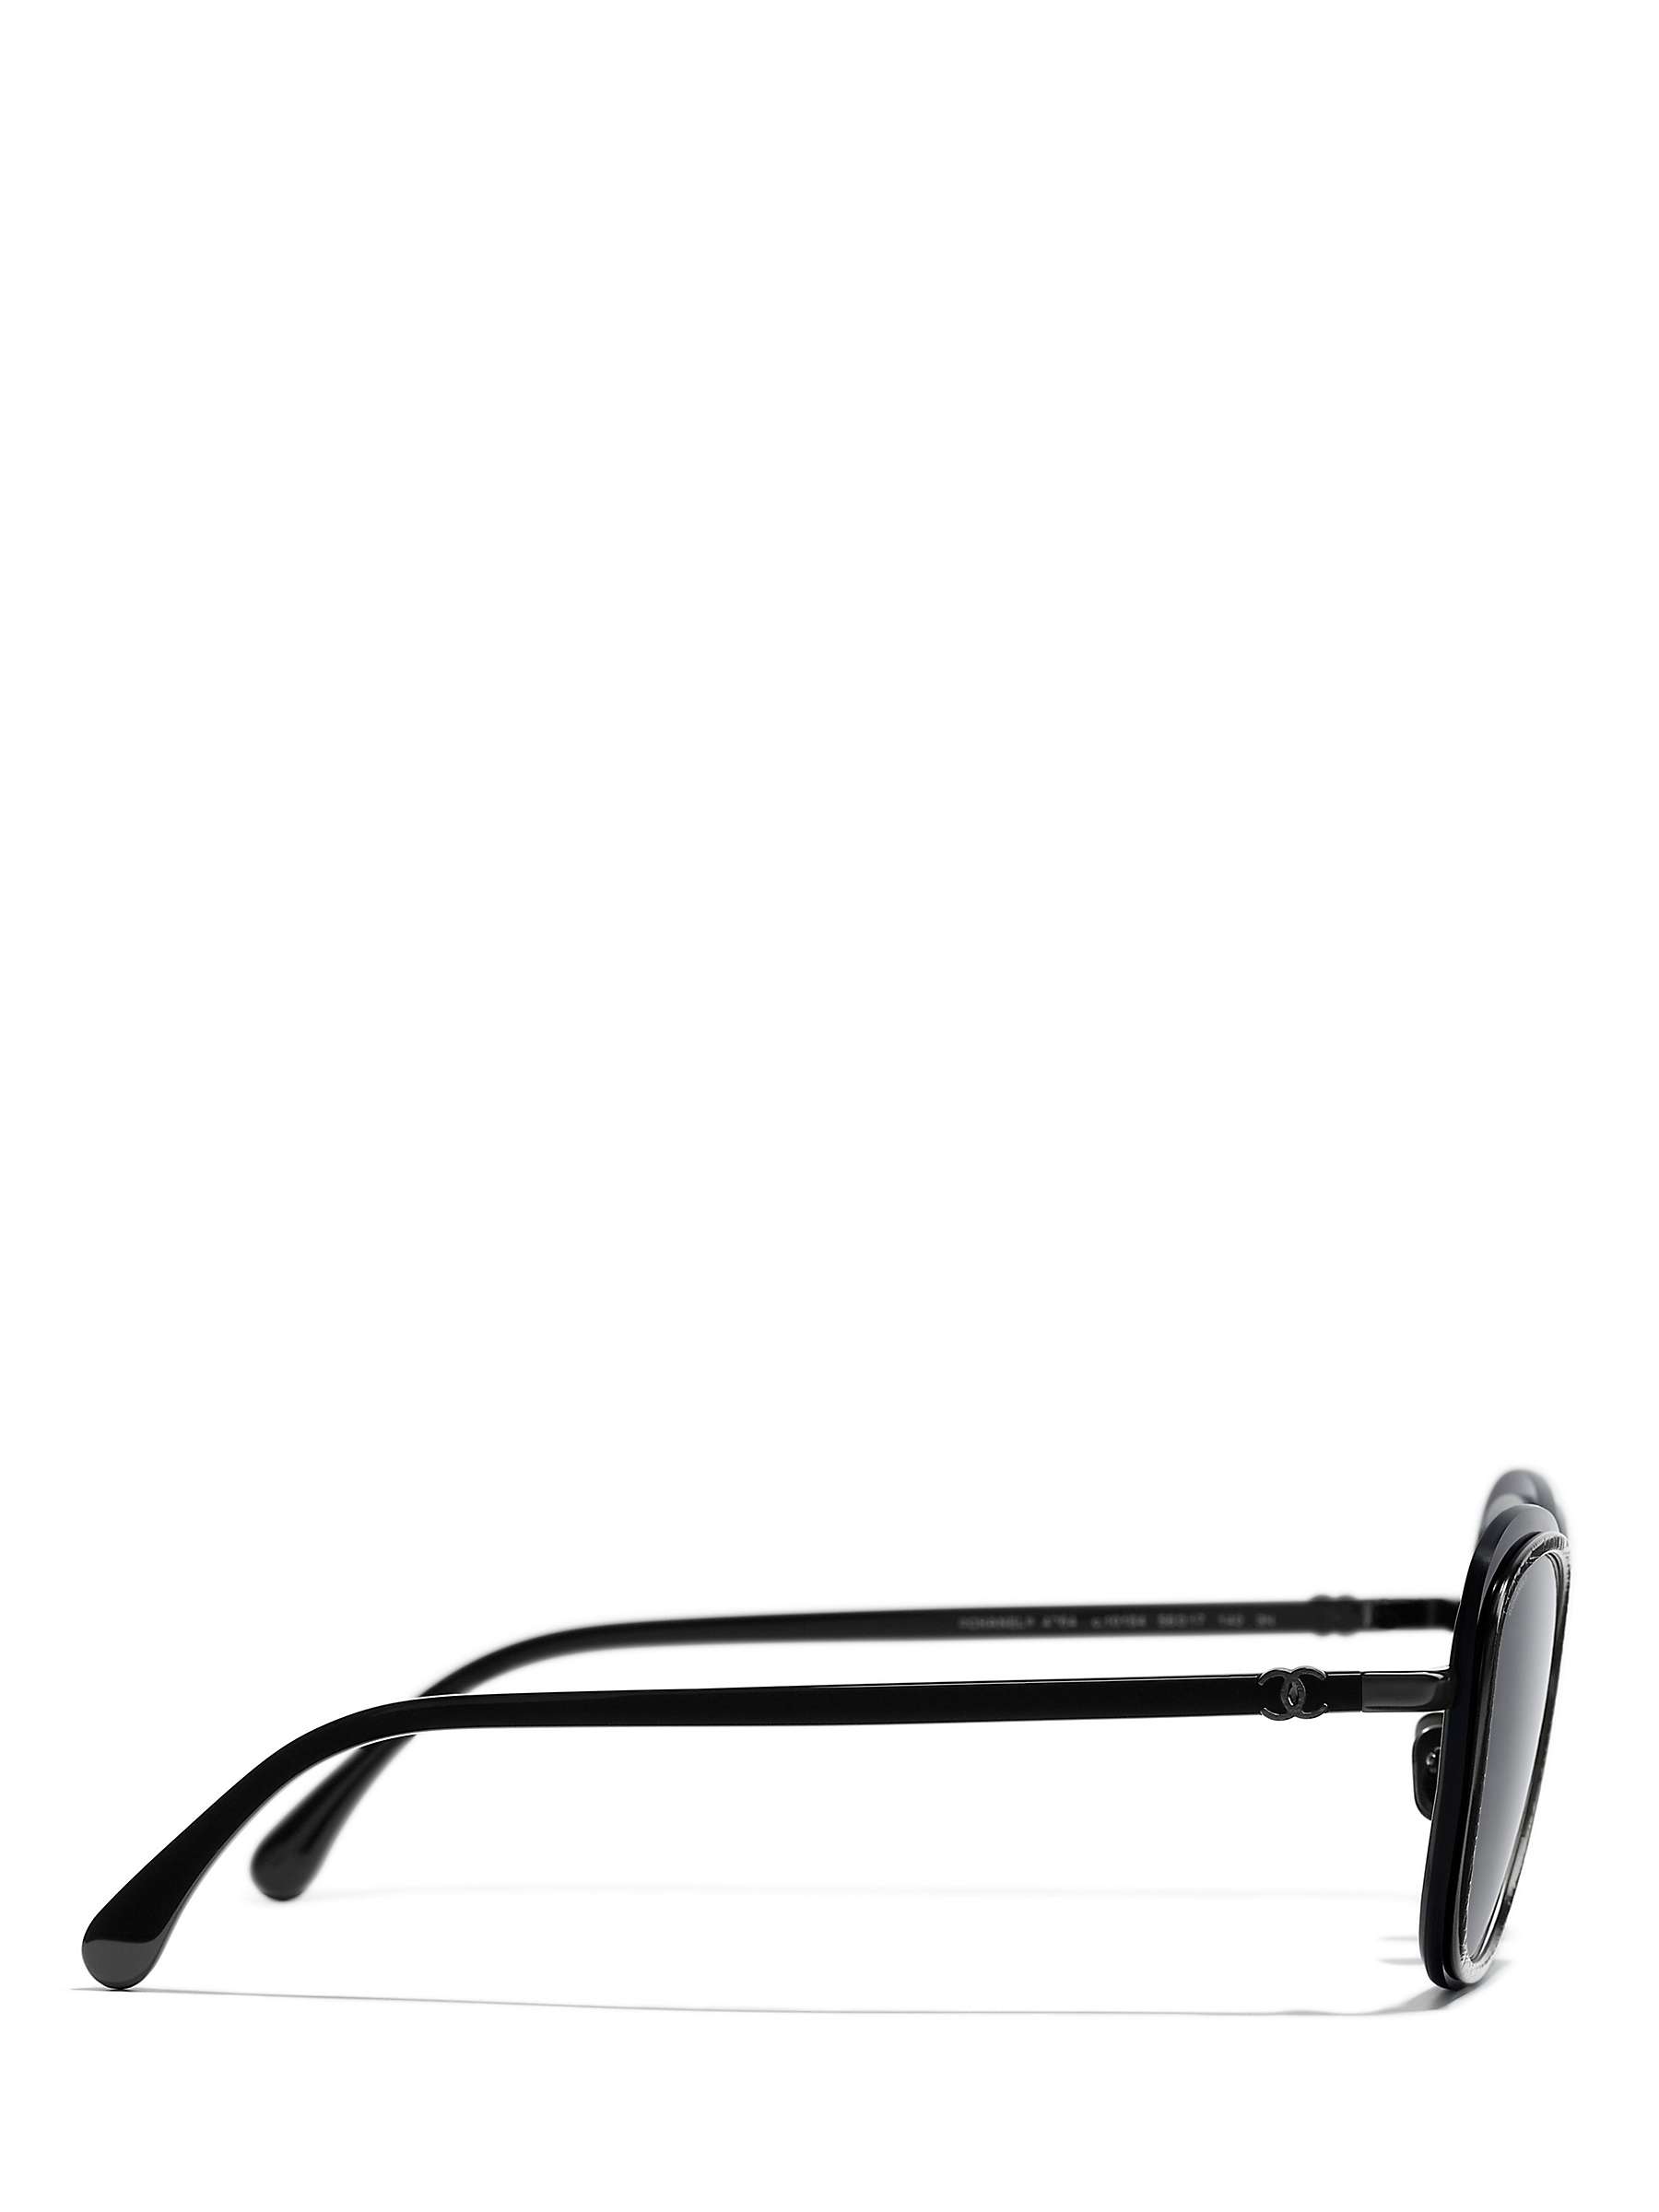 Buy CHANEL Oval Sunglasses CH4264 Black/Green Online at johnlewis.com